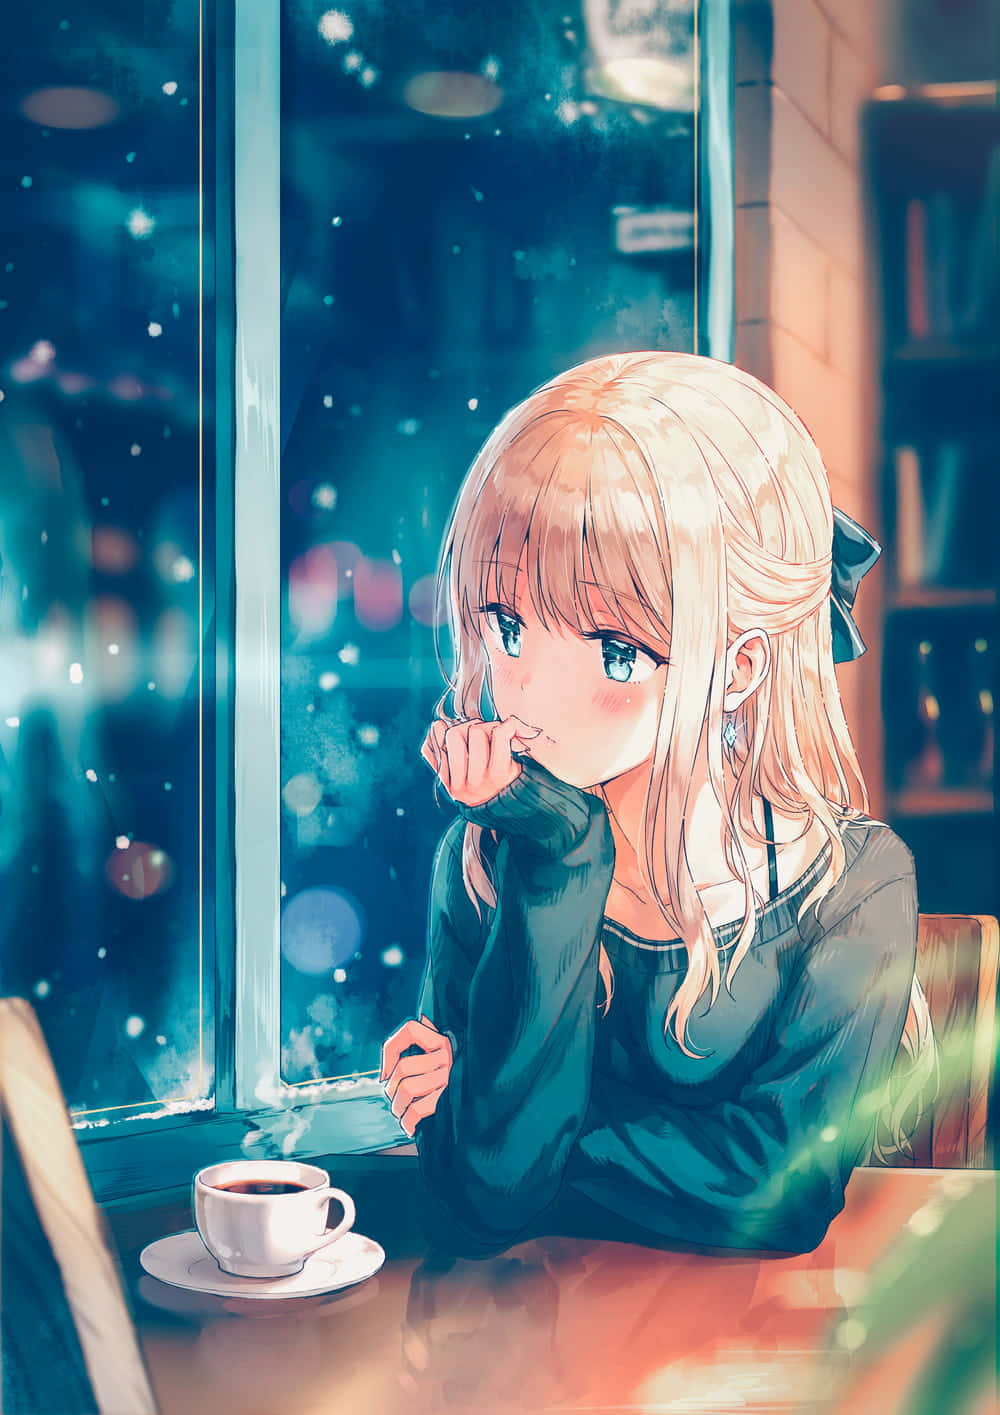 Welcome to the magical and adventurous world of Cafe Anime! Wallpaper